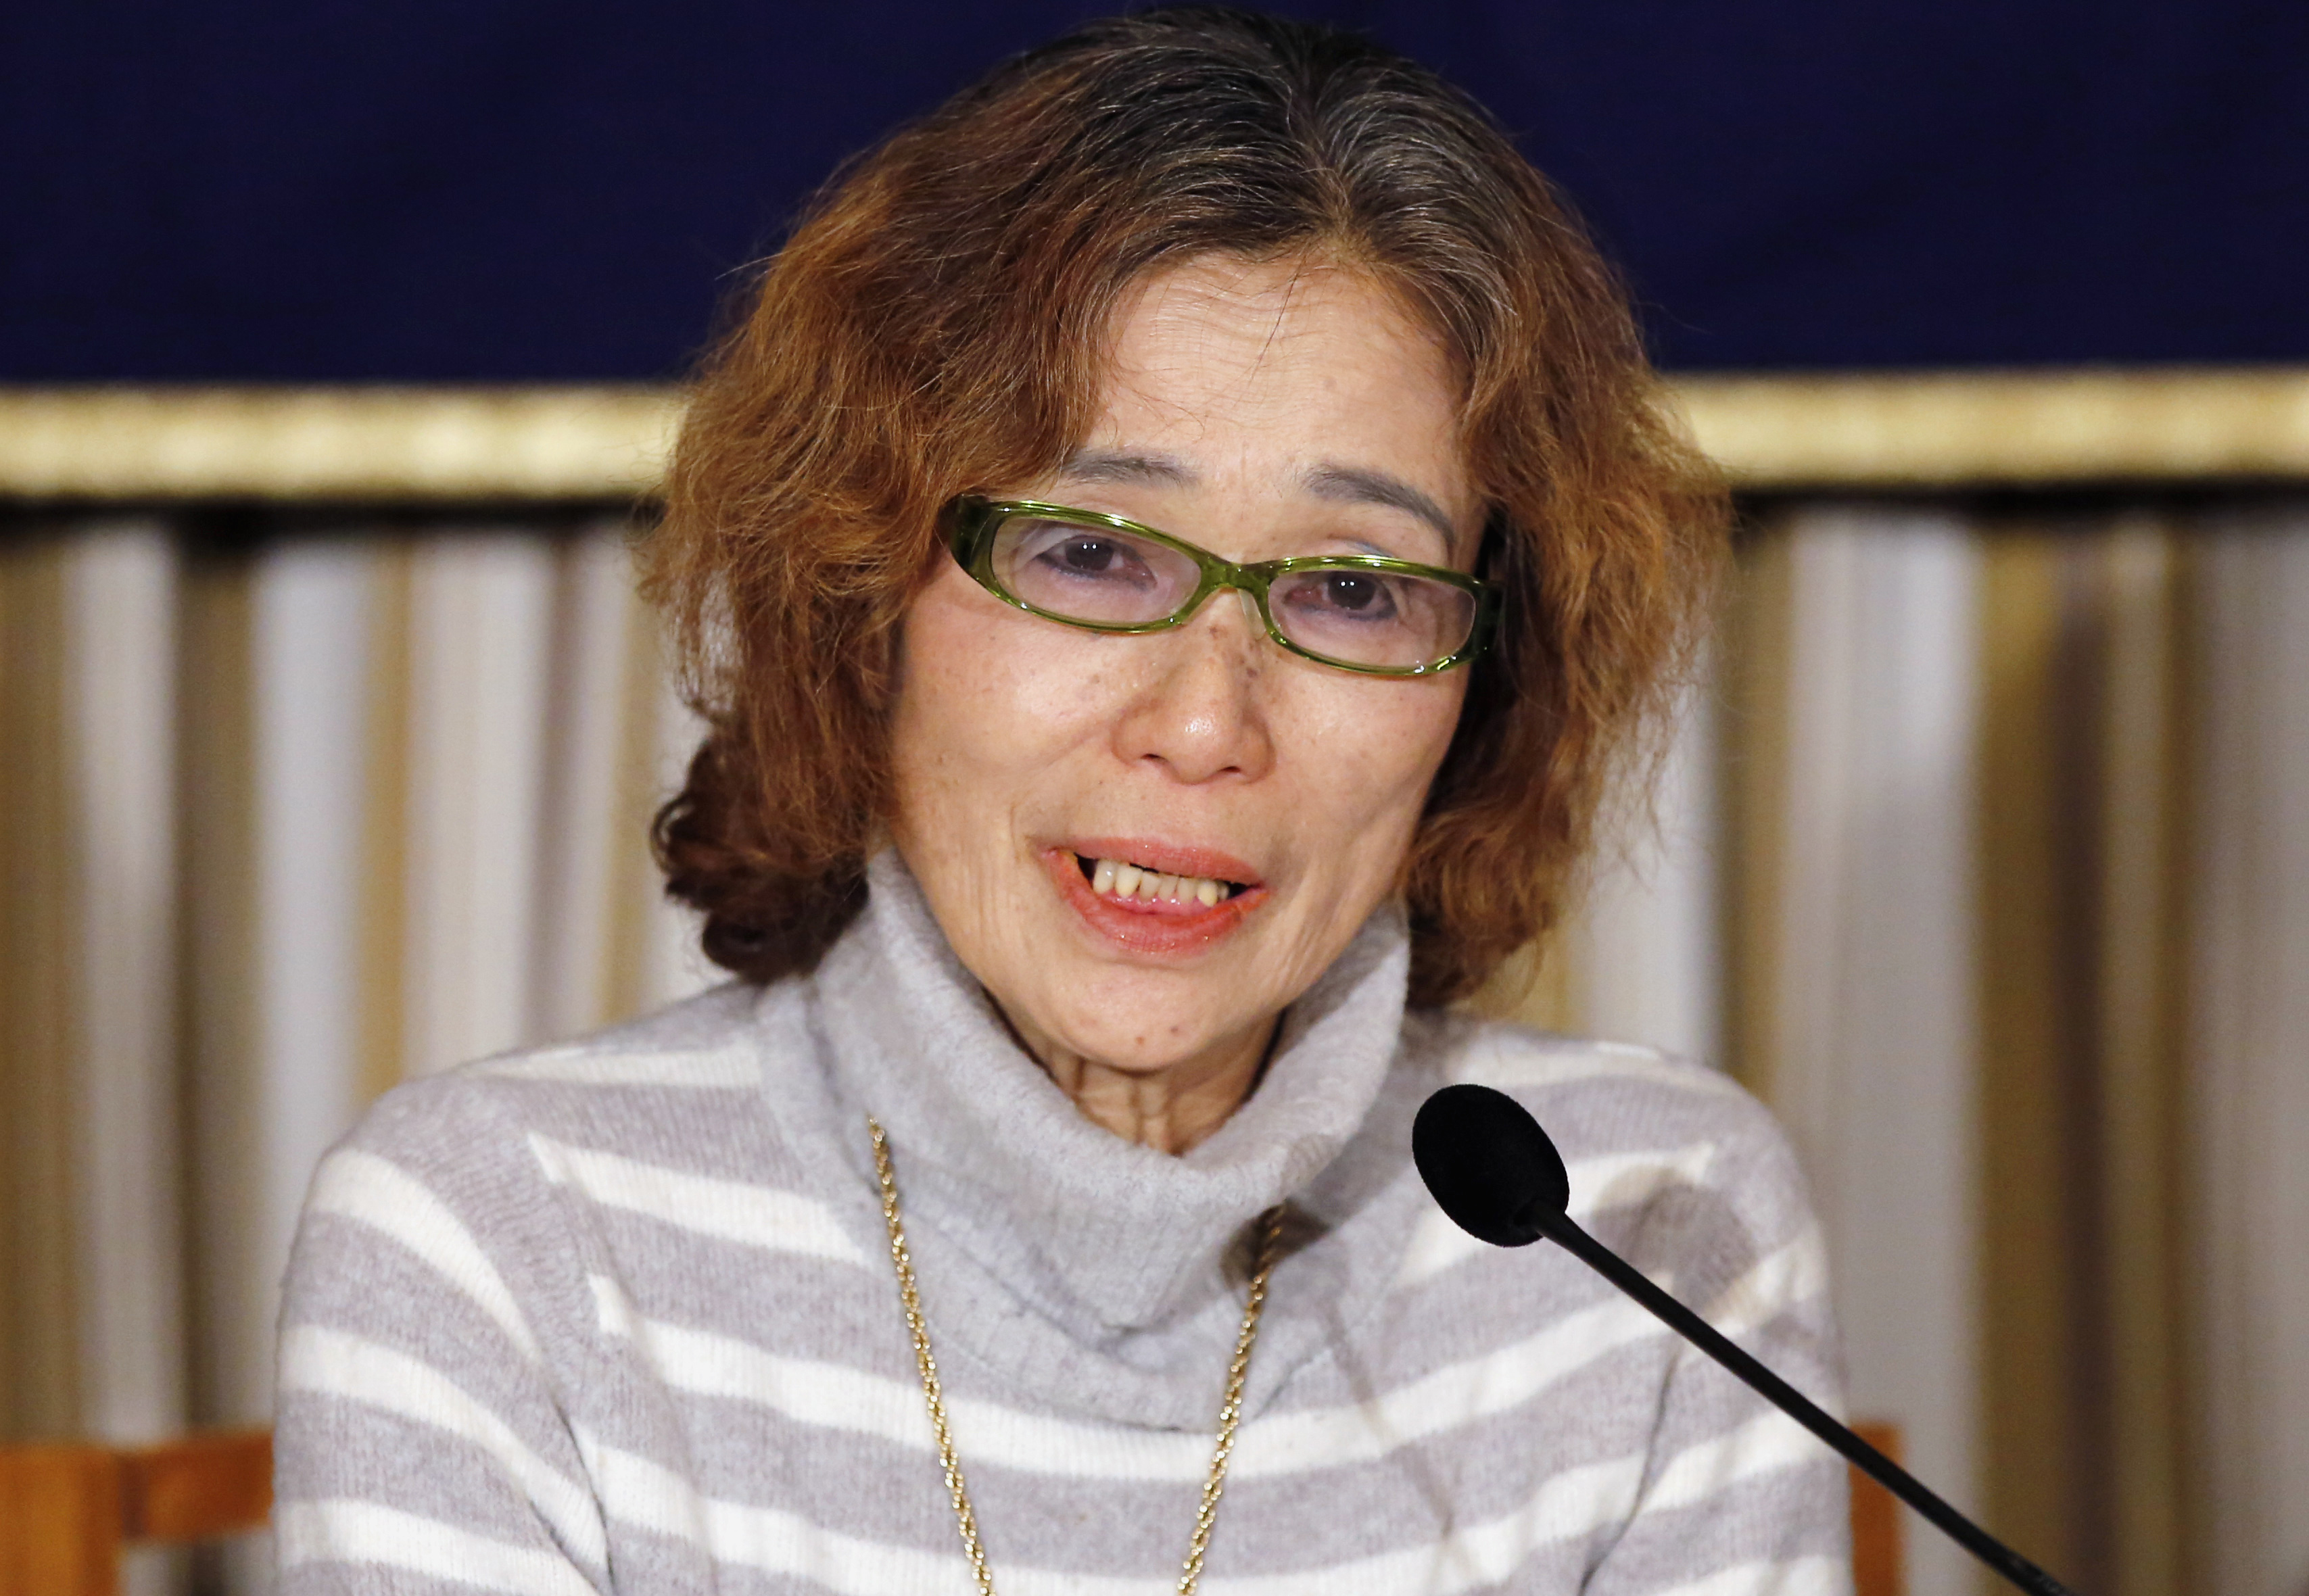 Junko Ishido, mother of Kenji Goto, a Japanese journalist being held captive by Islamic State militants speaks during a news conference at the Foreign Correspondents' Club of Japan in Tokyo